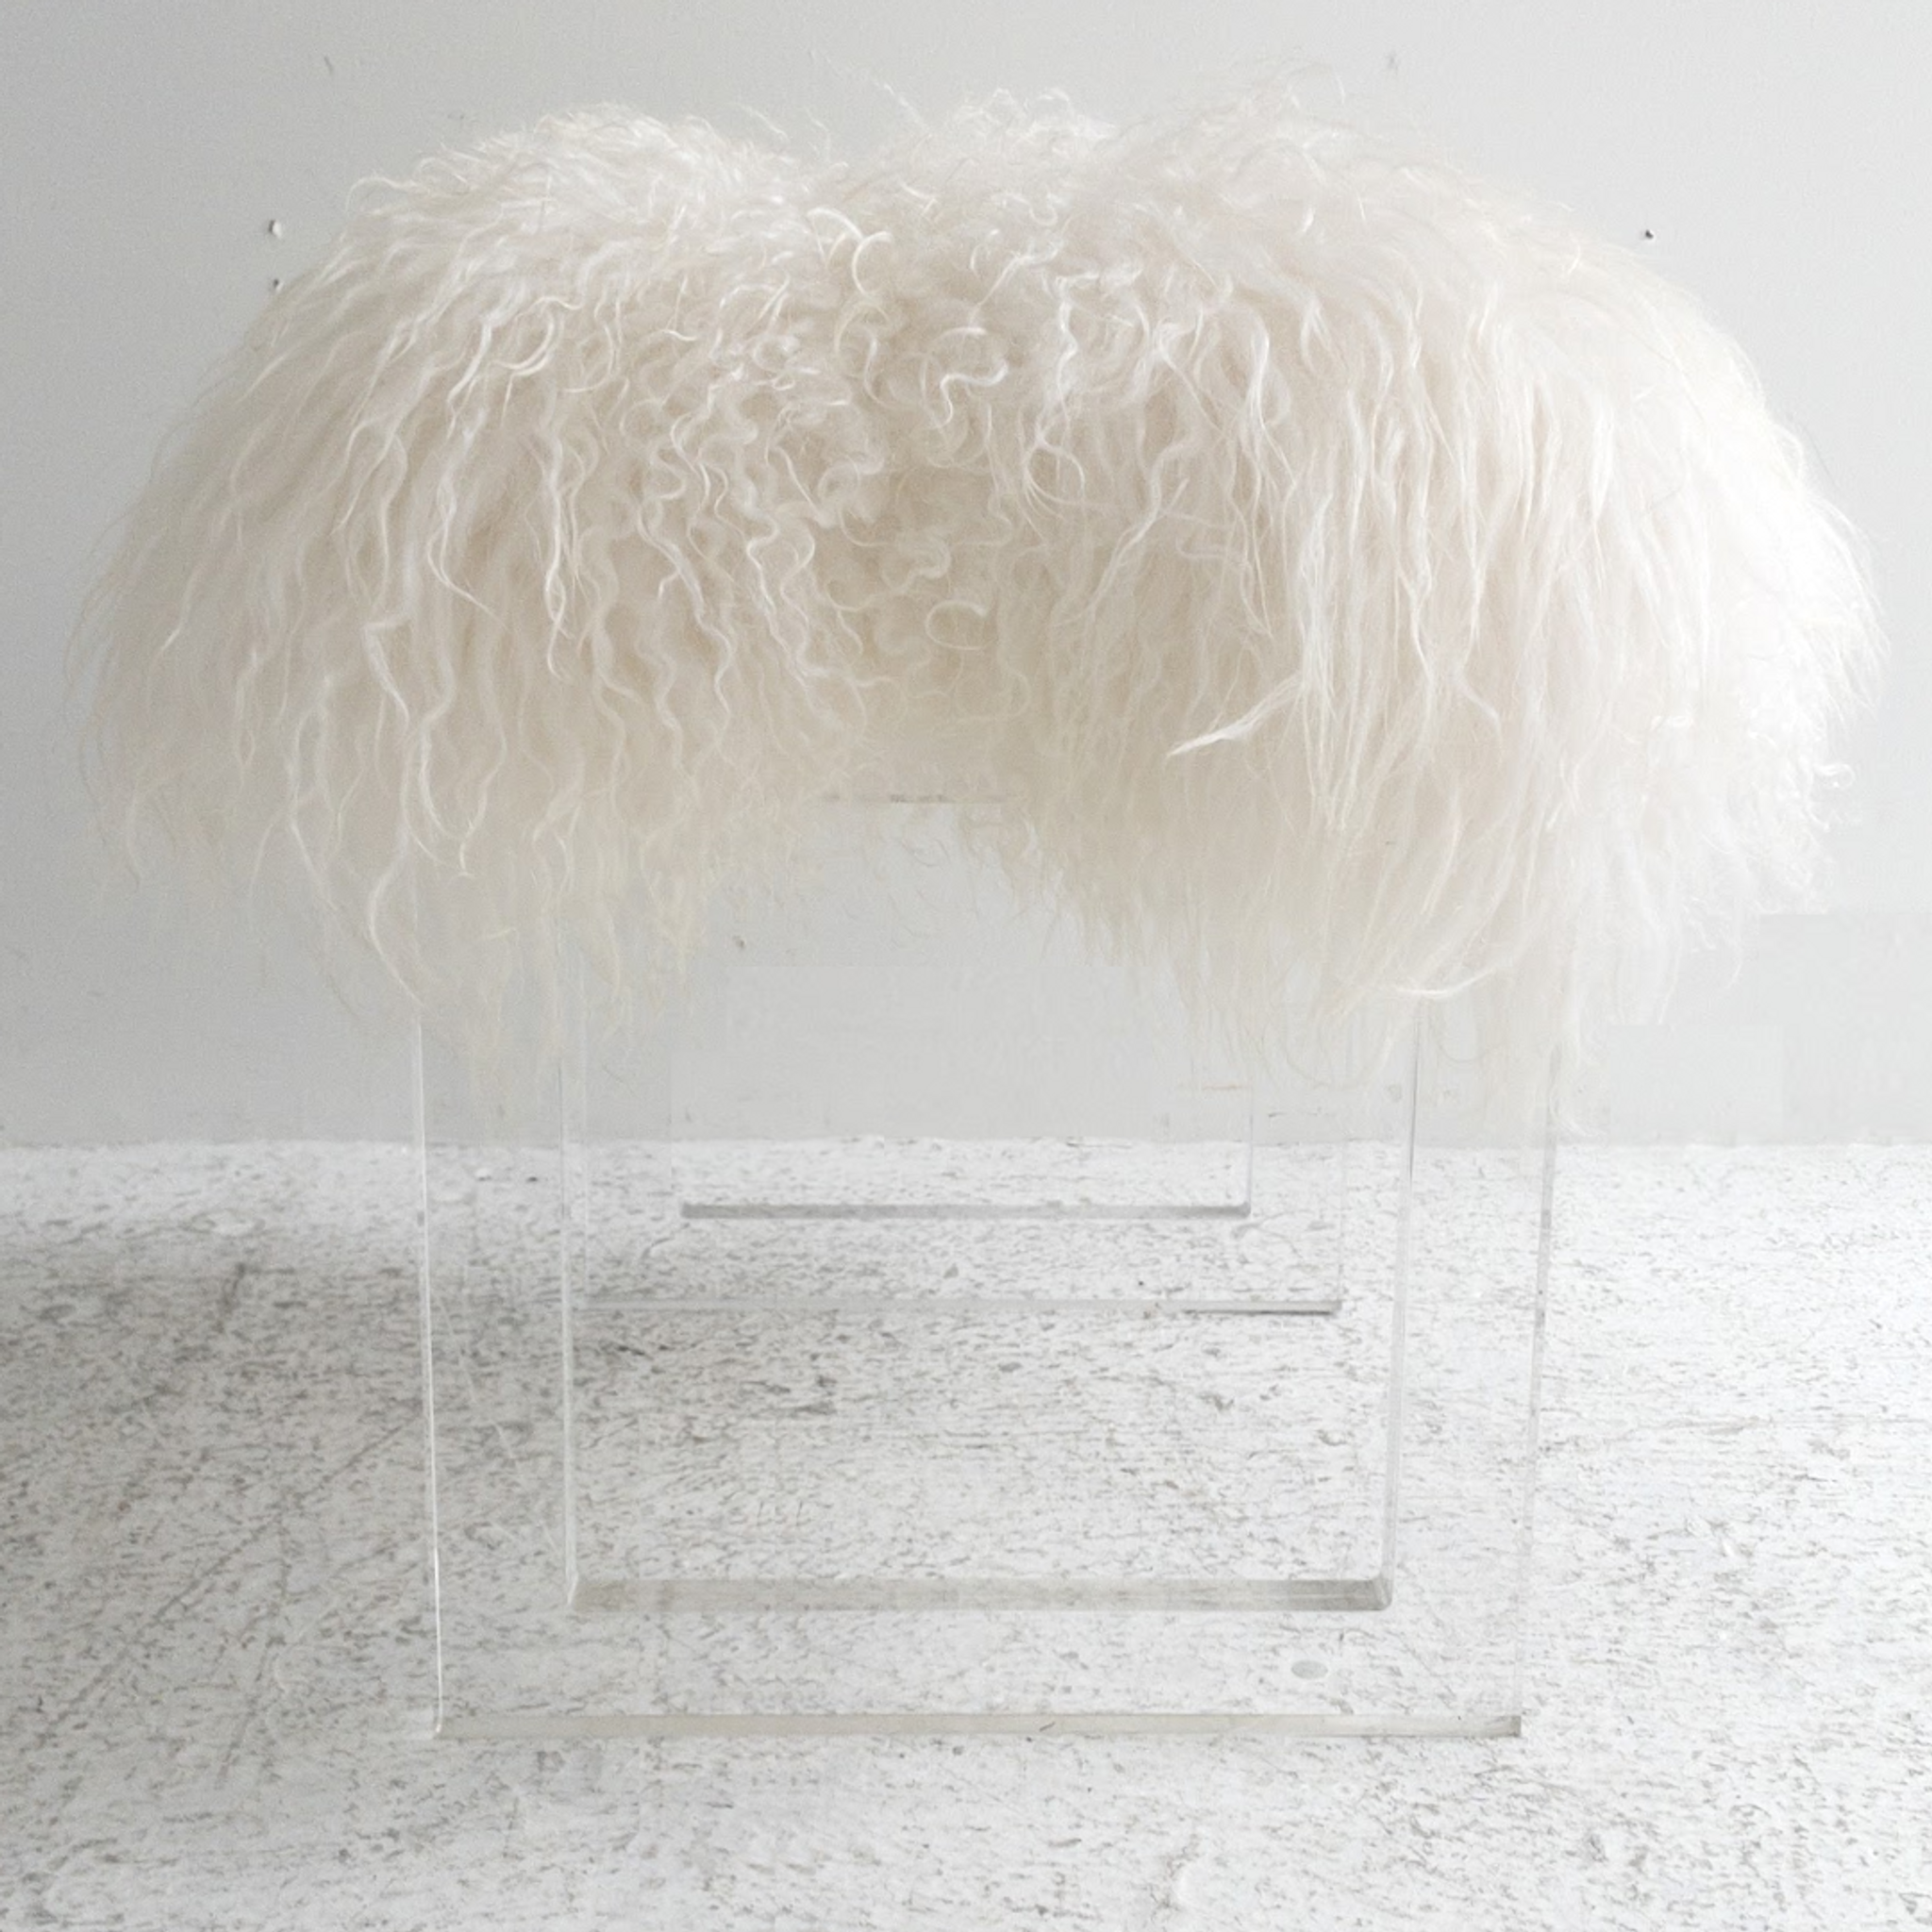 lucite clear acrylic glam Cut Out Stool Mongolian Fur